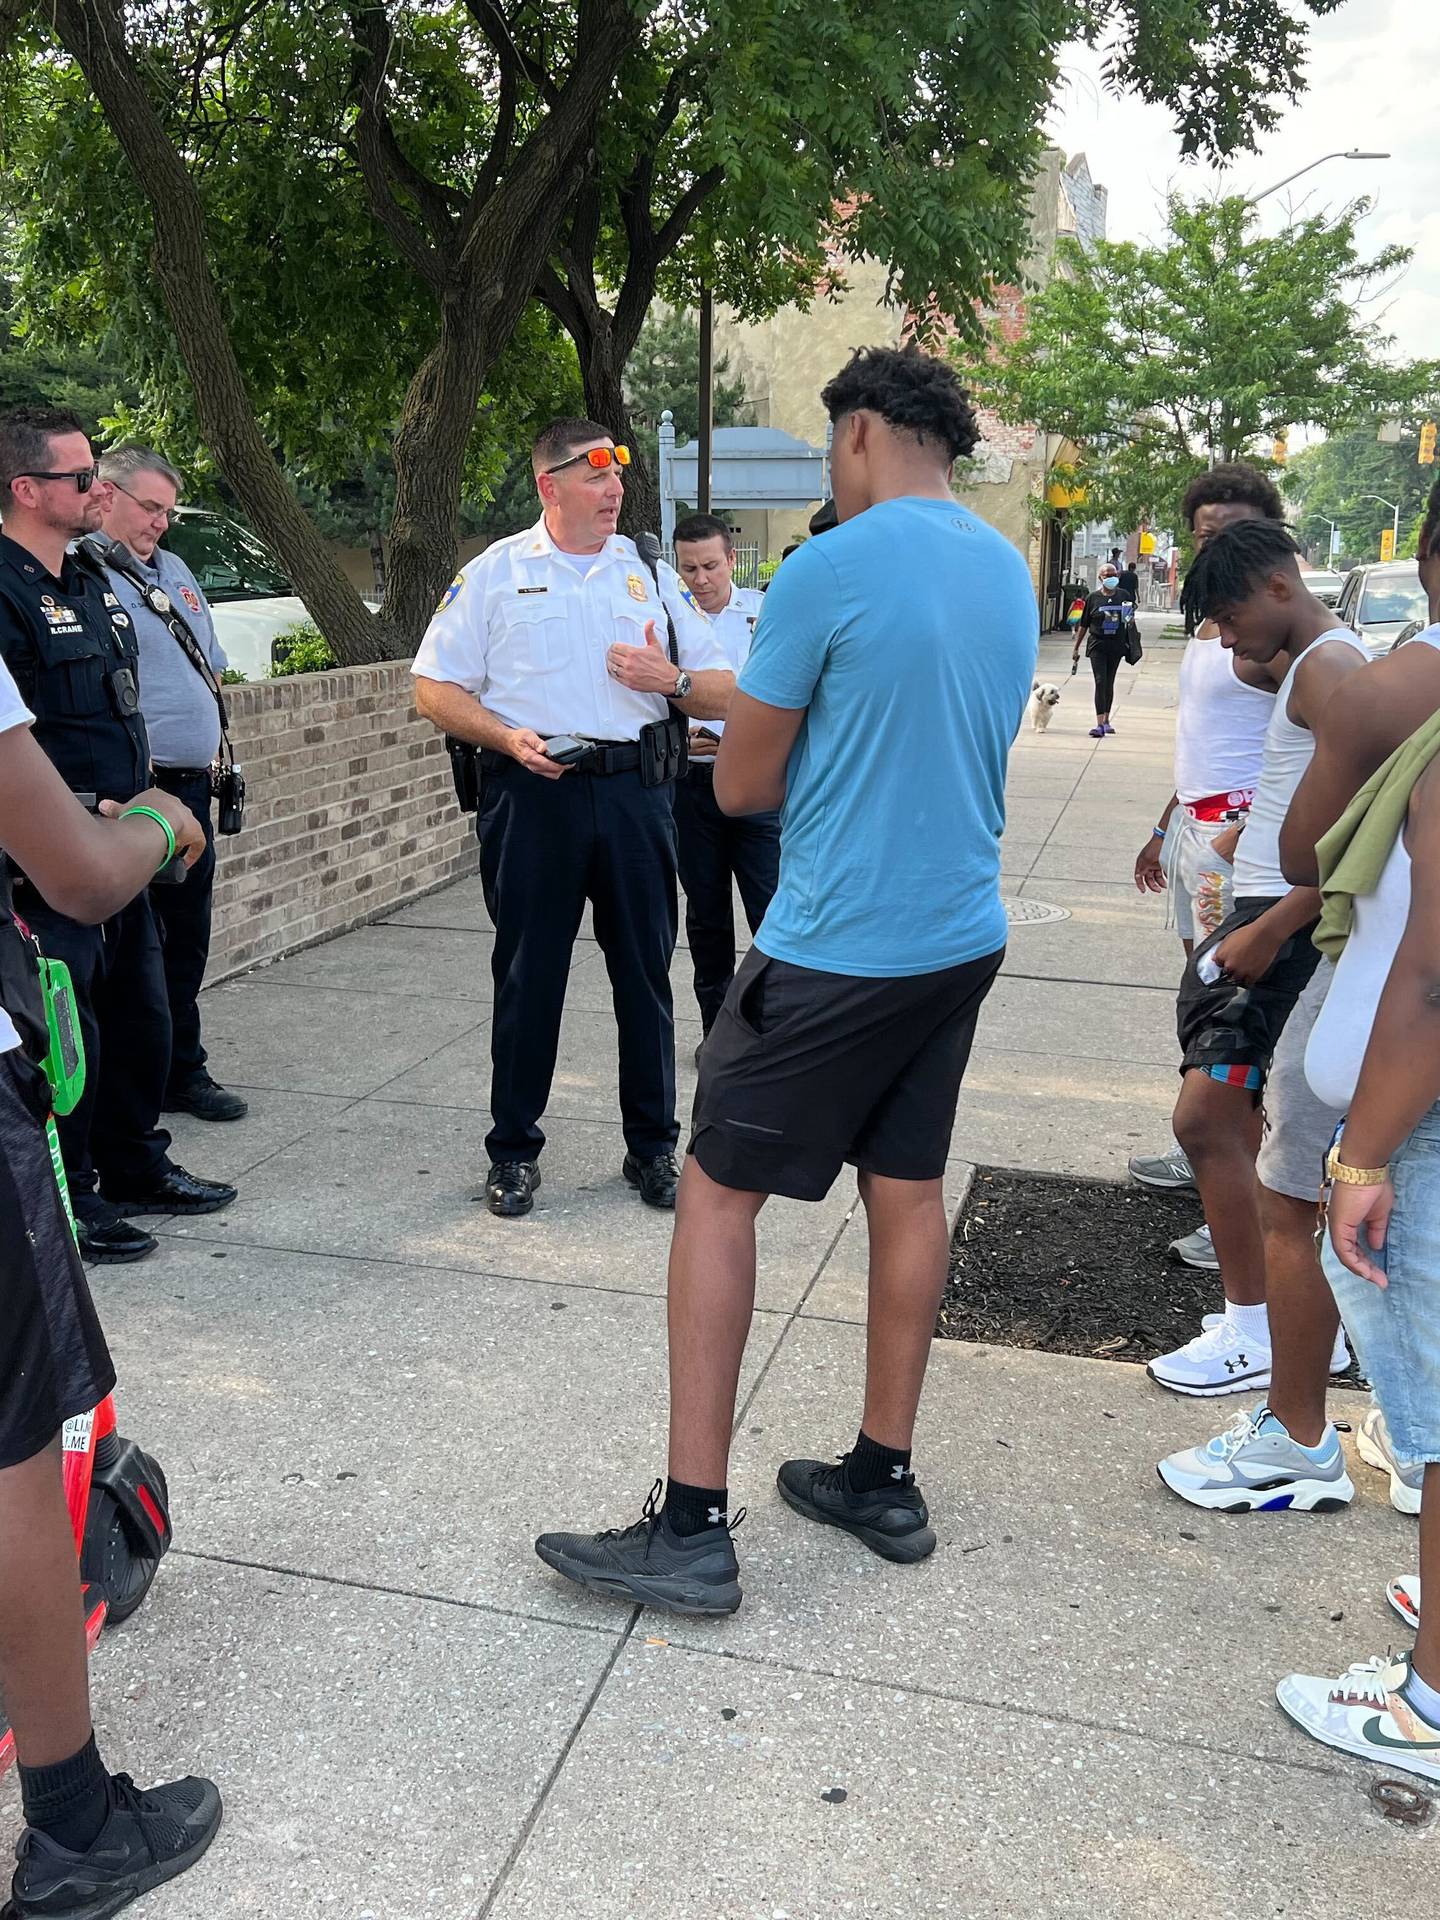 Eastern District Maj. Guy Thacker, middle, speaks to a group of young men frustrated that the city blocked their efforts to throw a party on Mura Street. Officials spent a week trying to thwart the party based on concerns from neighbors.